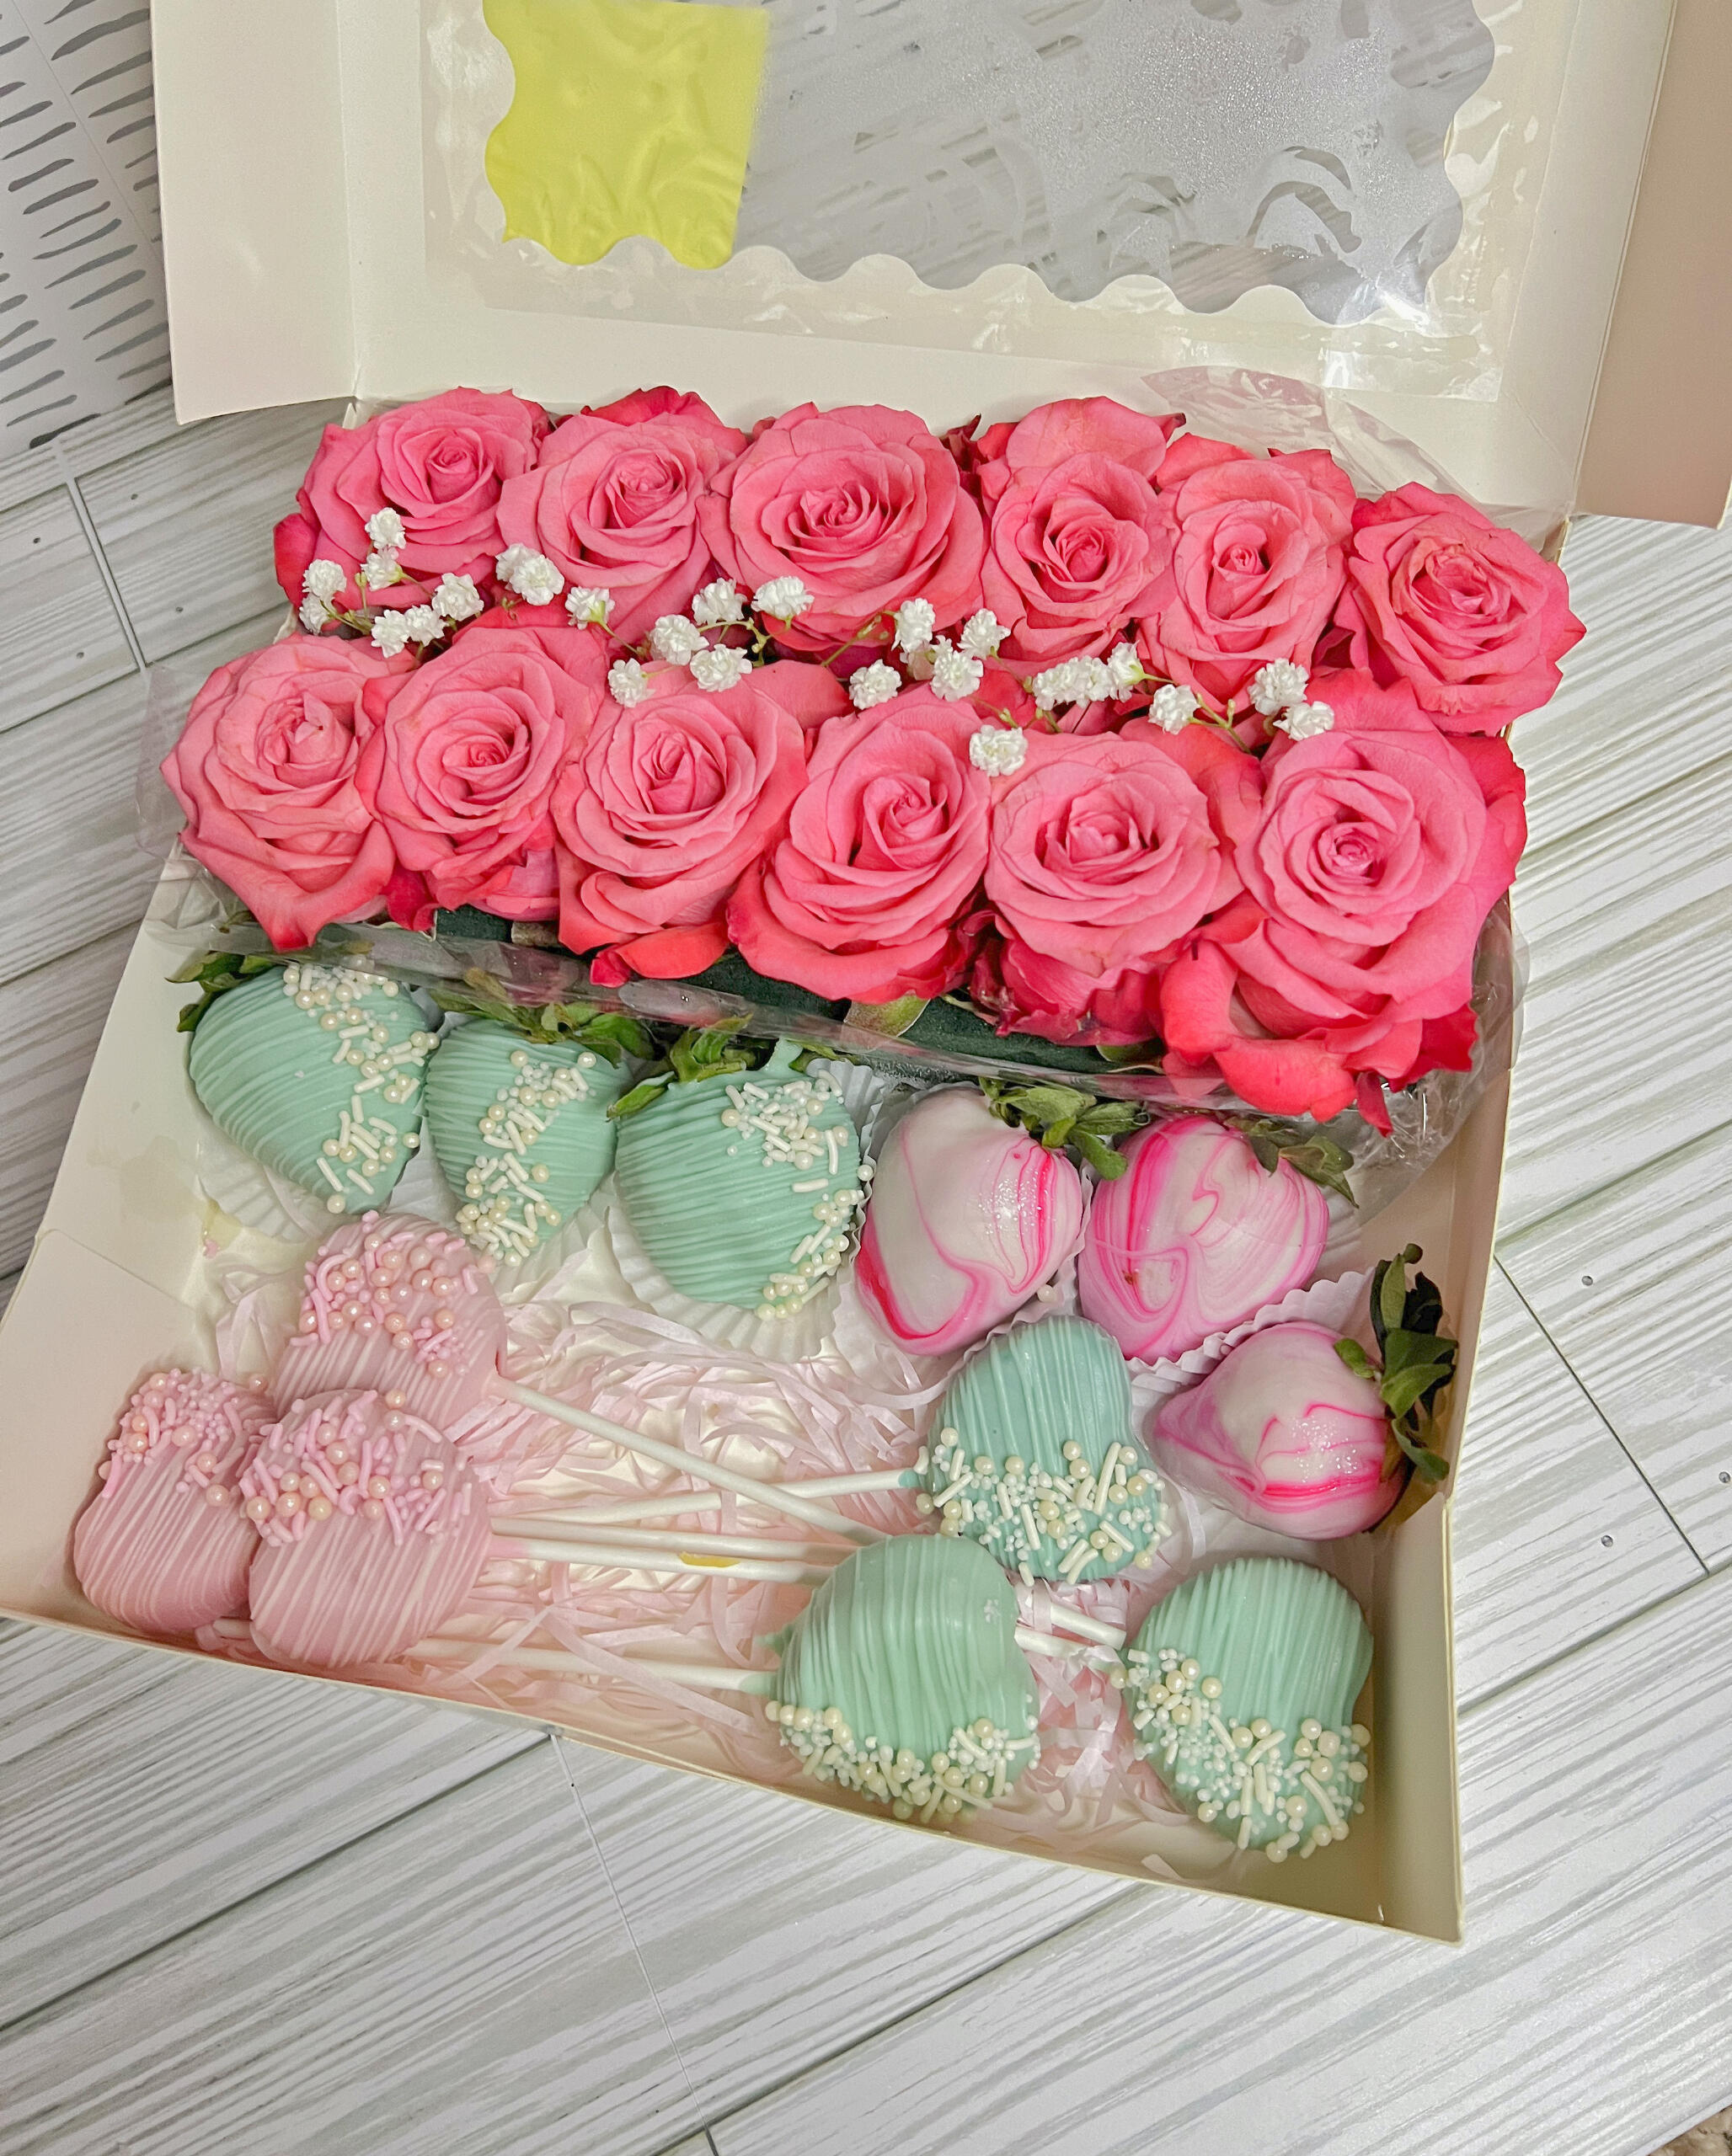 Roses, strawberries and cake pops